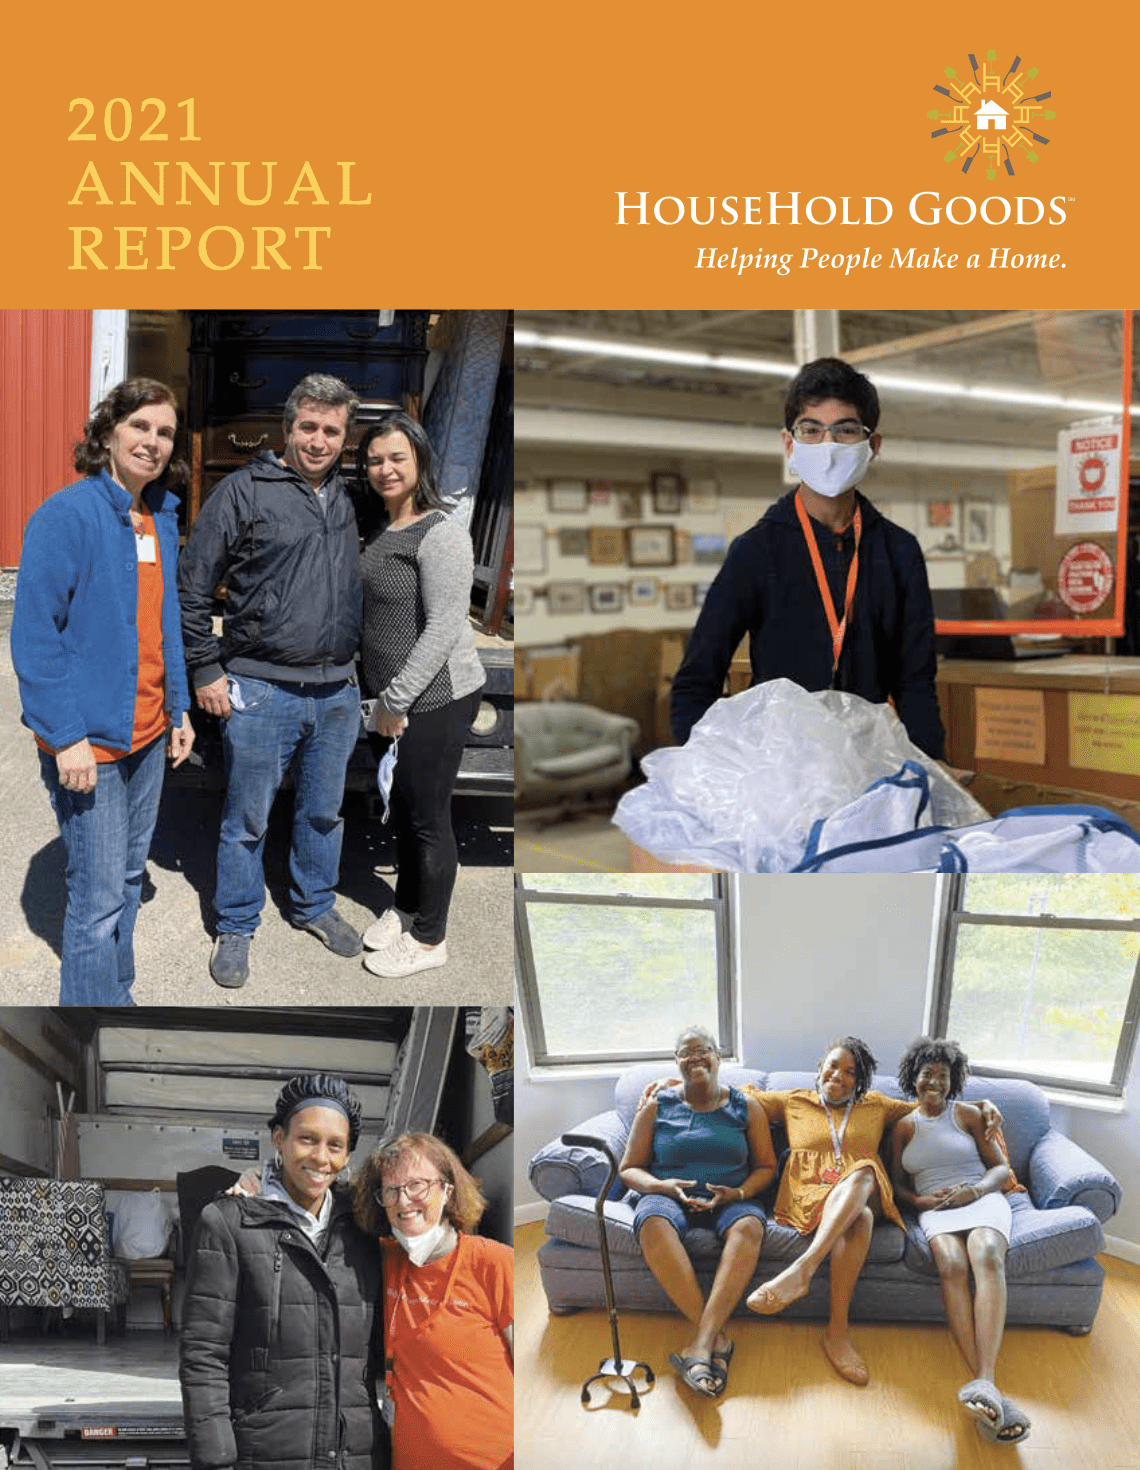 https://www.householdgoods.org/wp-content/uploads/2022/08/HHG-2021-Annual-Report-Cover.png